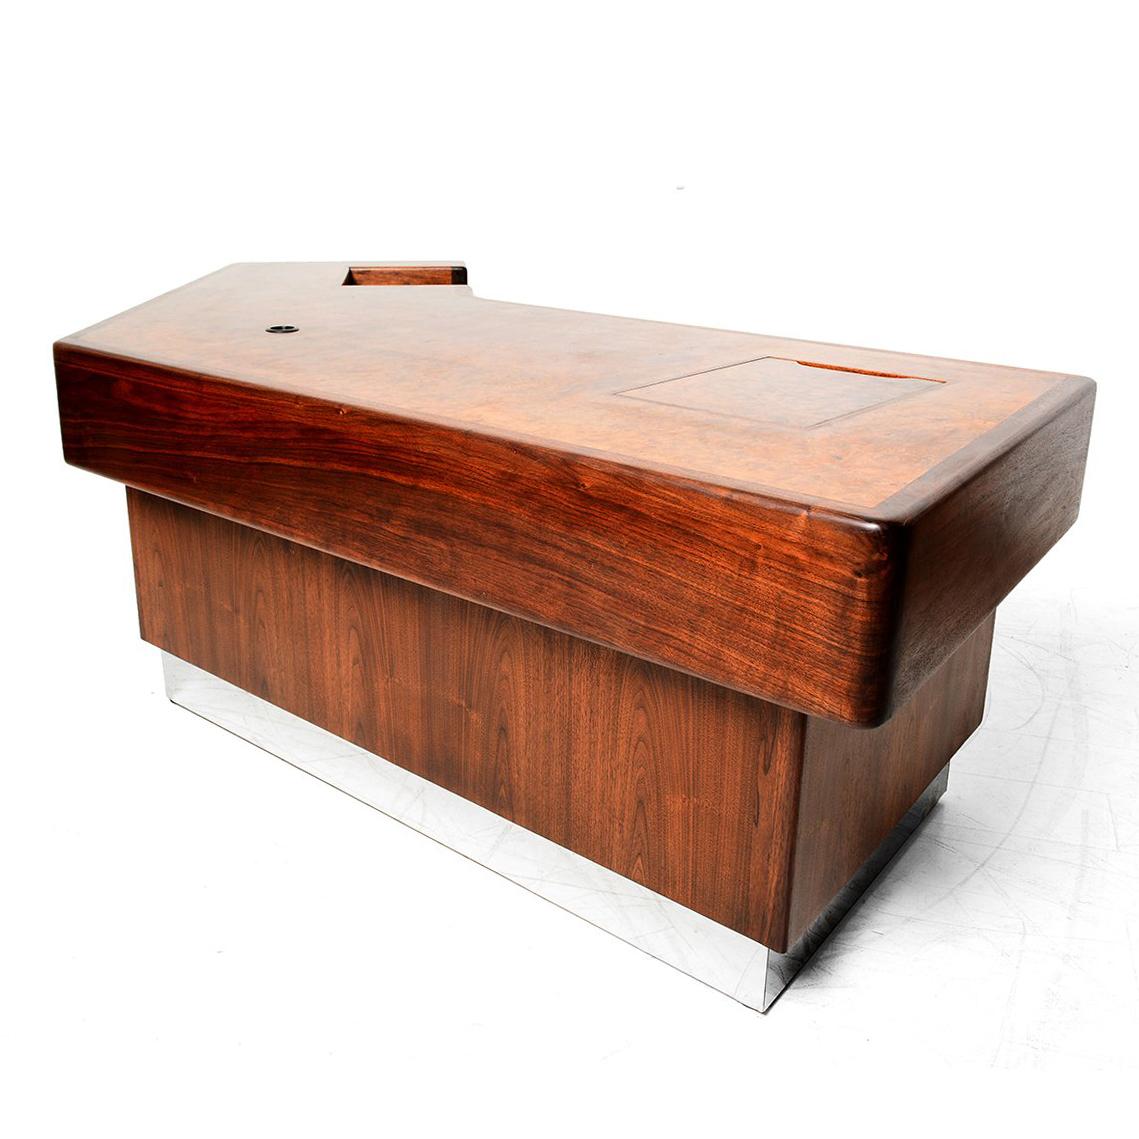 AMBIANIC presents
Executive Desk boomerang design by Monteverdi & Young, designed by Maurice Bailey.
Made in the USA, circa 1960s. Maker label present.
28.5 h x 102 w x 36 d inches
Clean modern lines walnut and burlwood. Stainless steel chrome